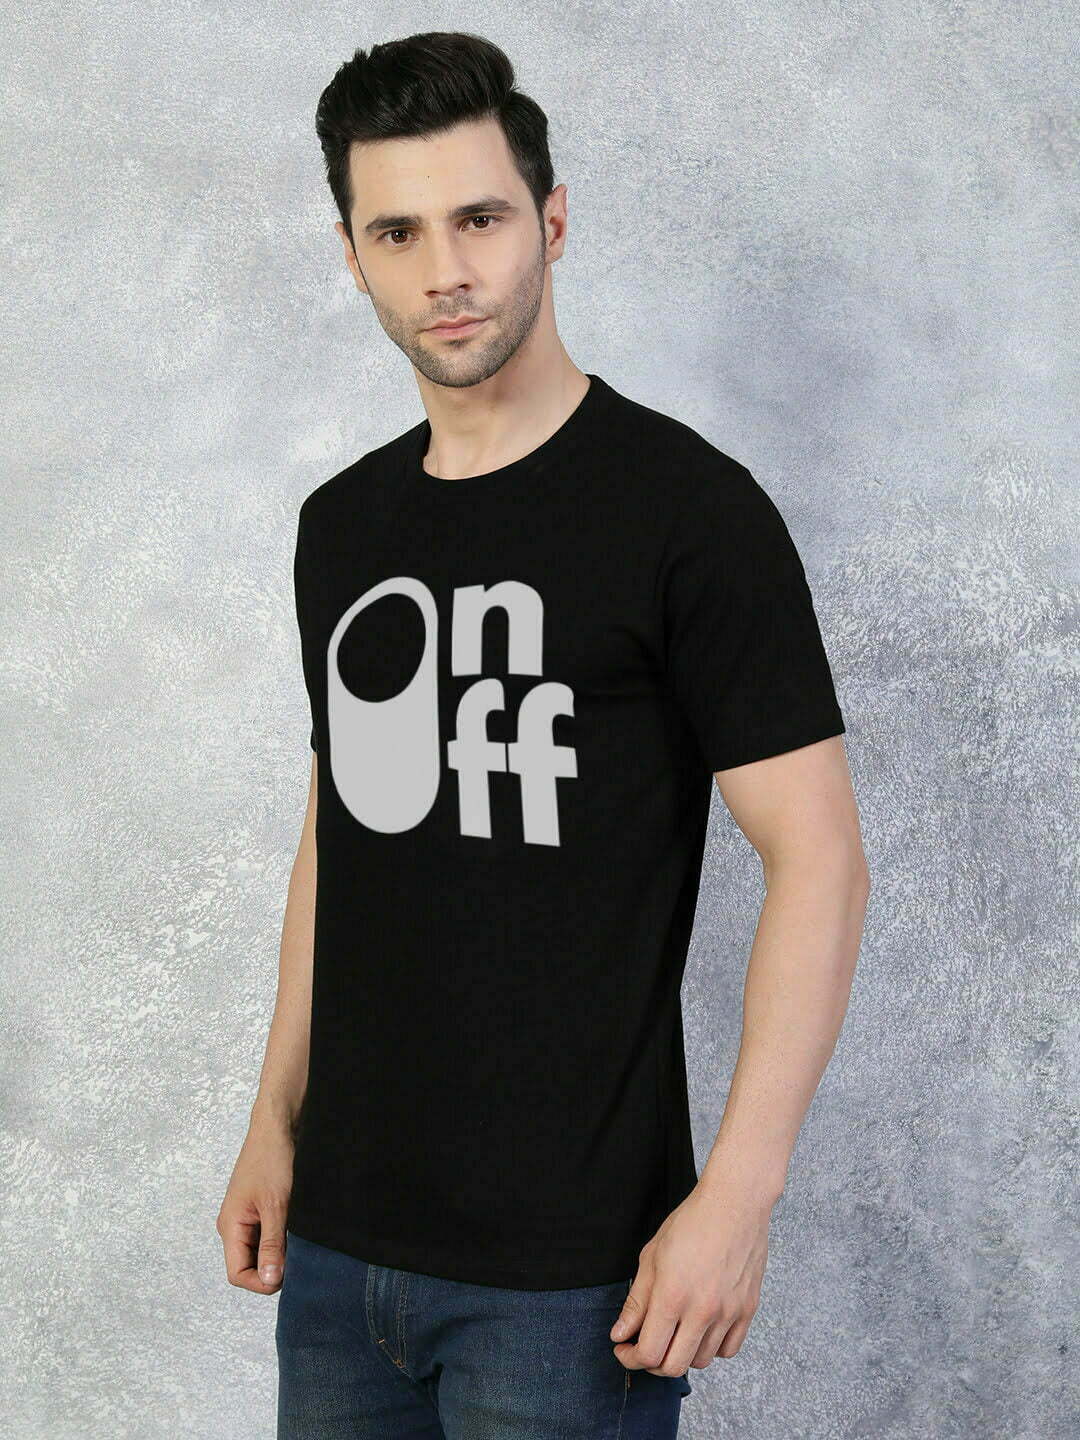 On-off Graphic